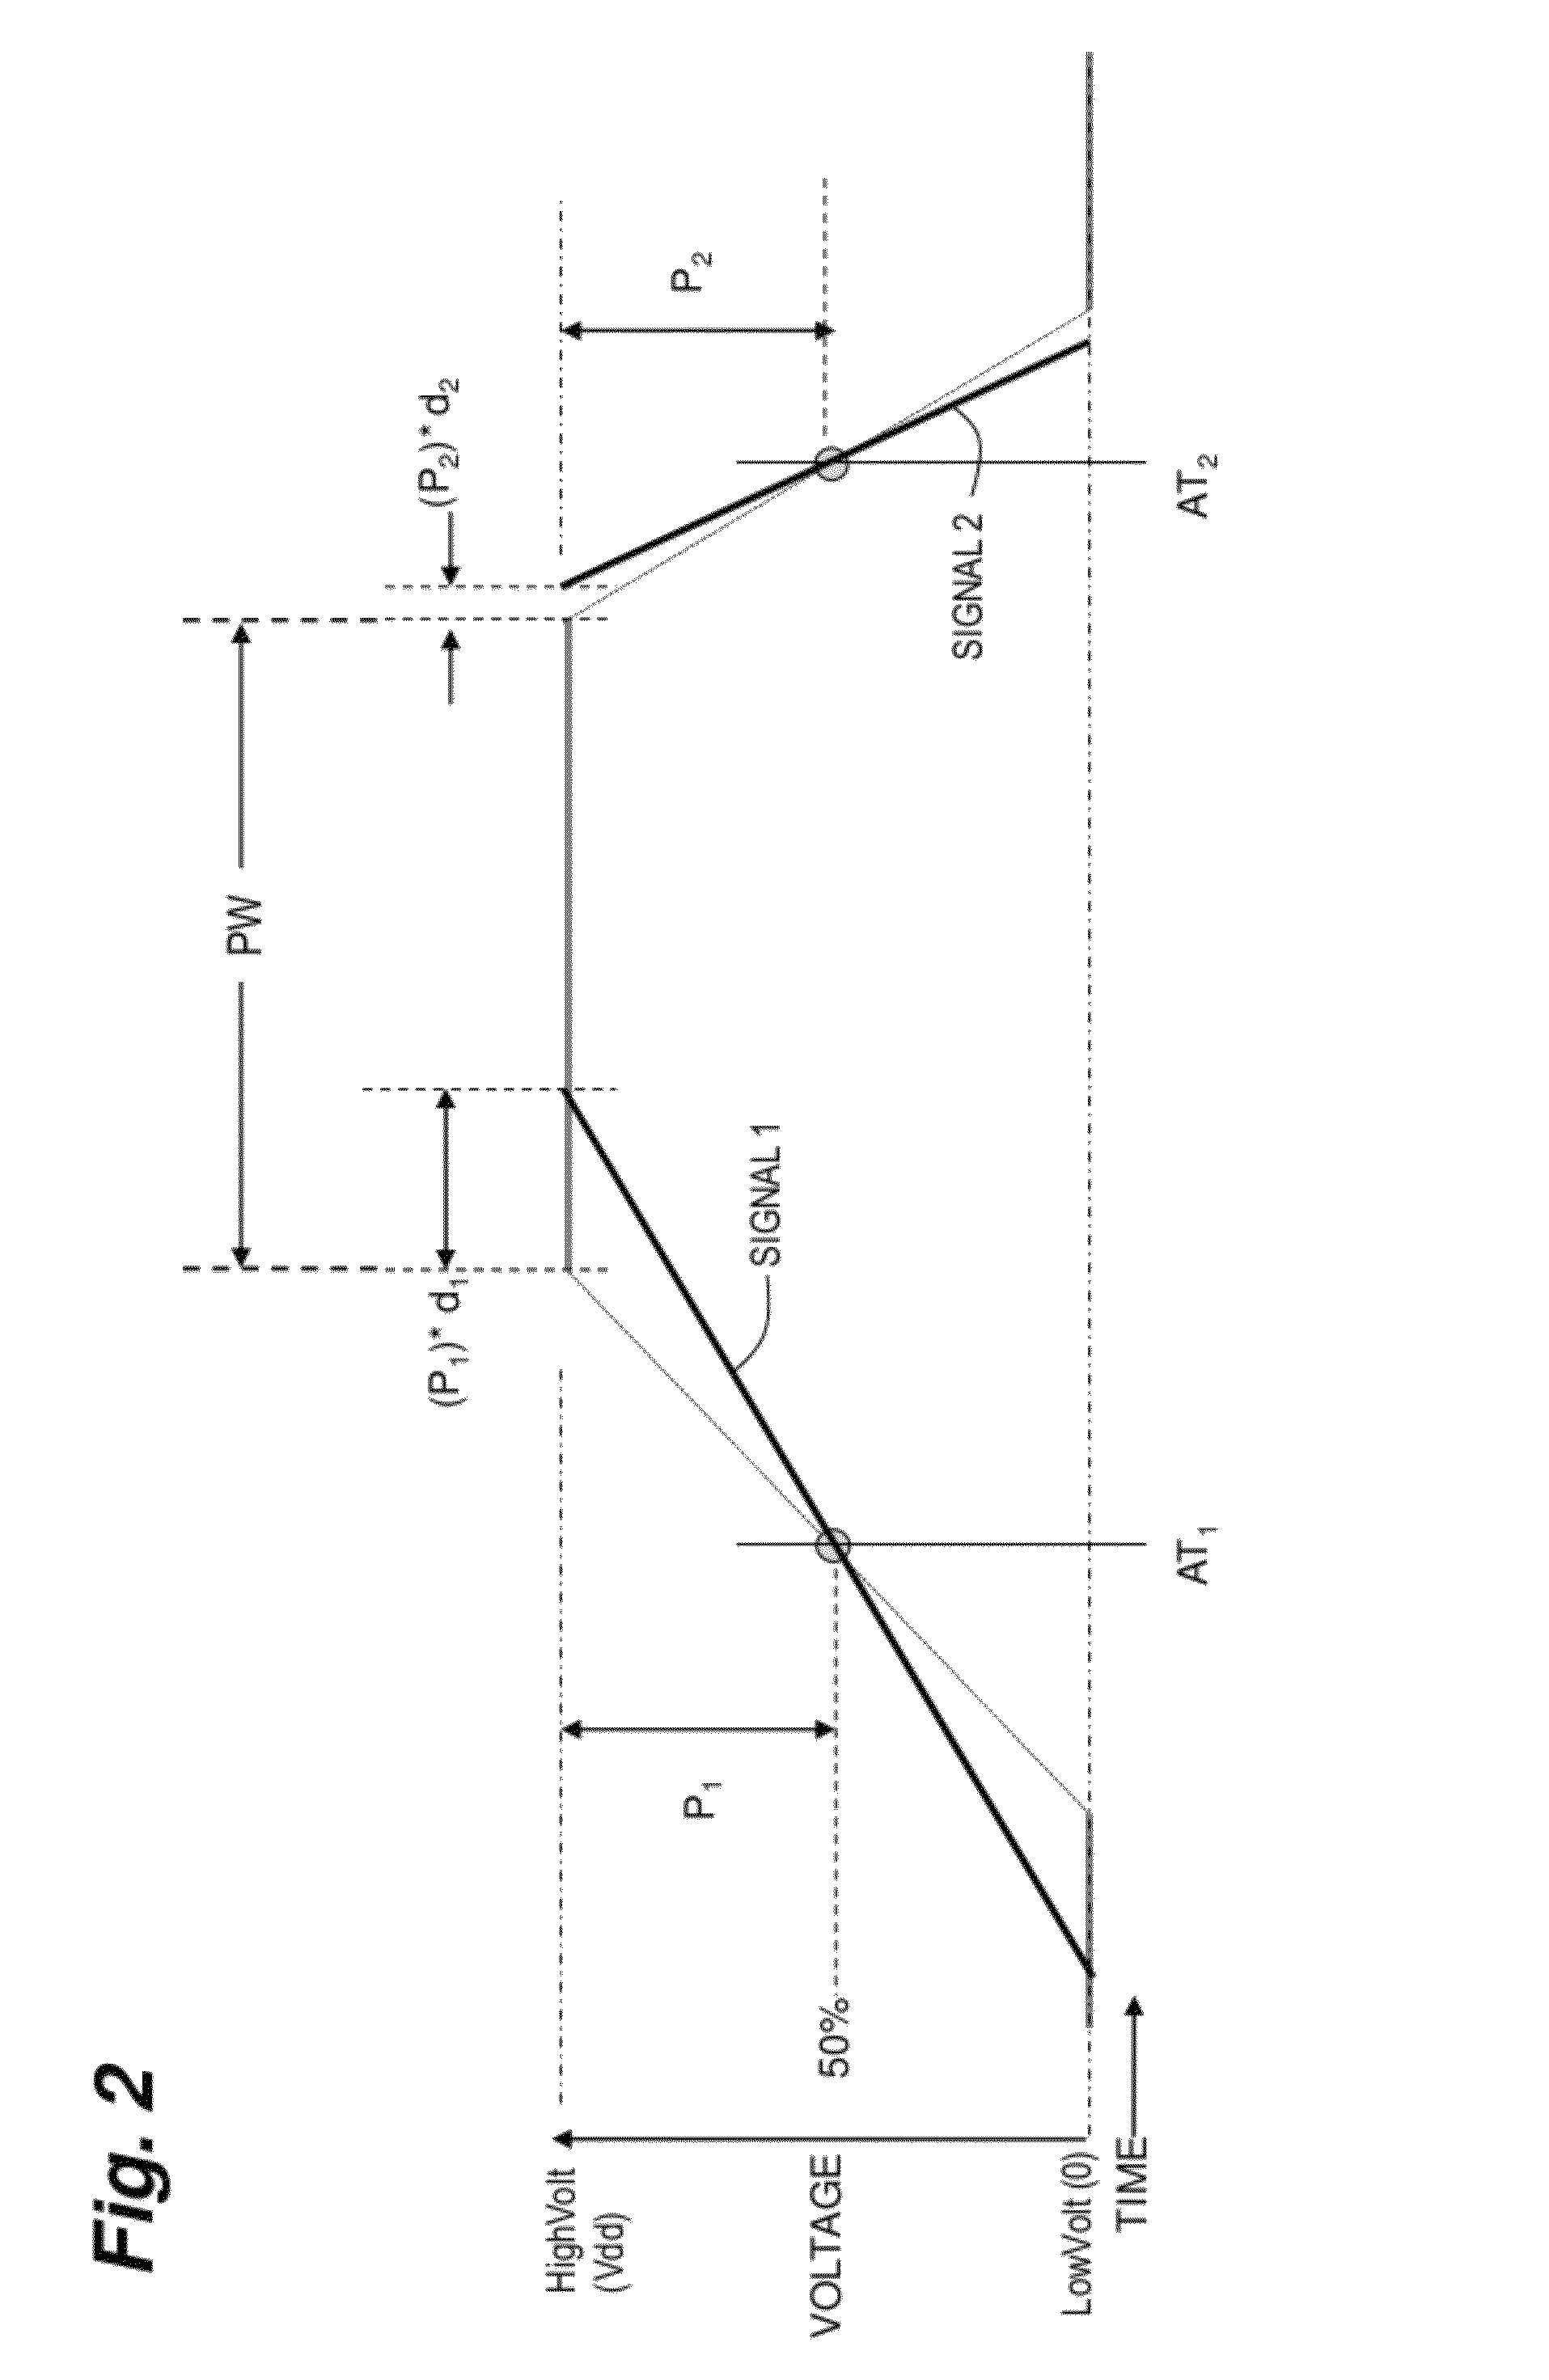 System and method for efficient modeling of NPskew effects on static timing tests